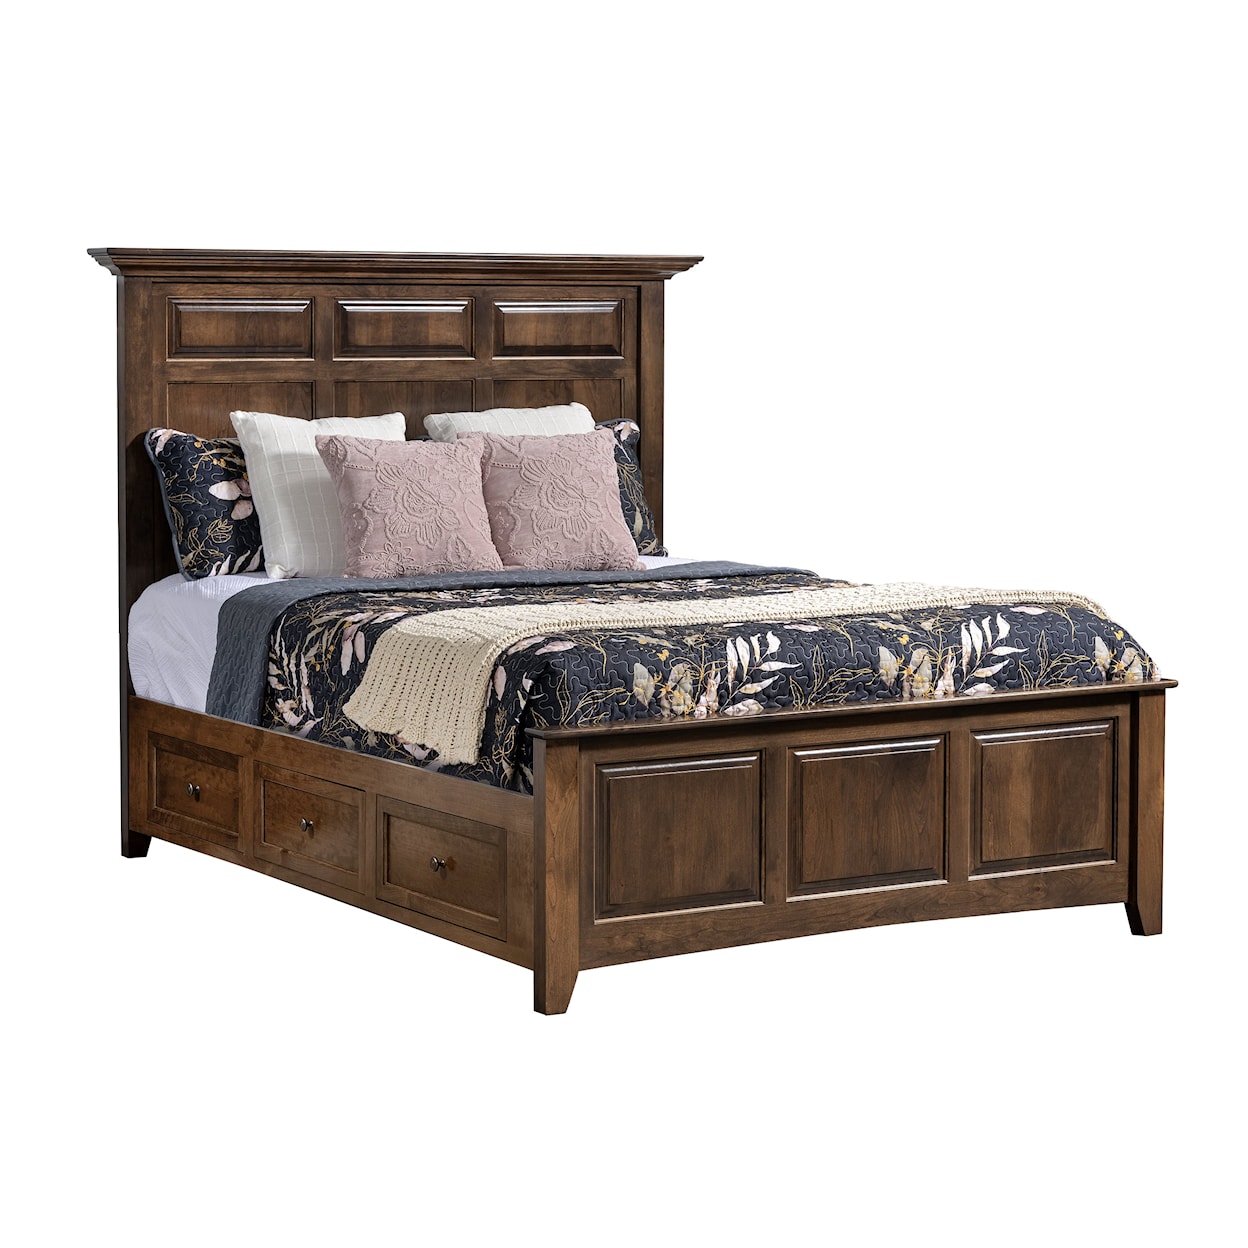 Millcraft Albany Queen MANTEL PANEL BED W/DRAWER UNITS RAISED